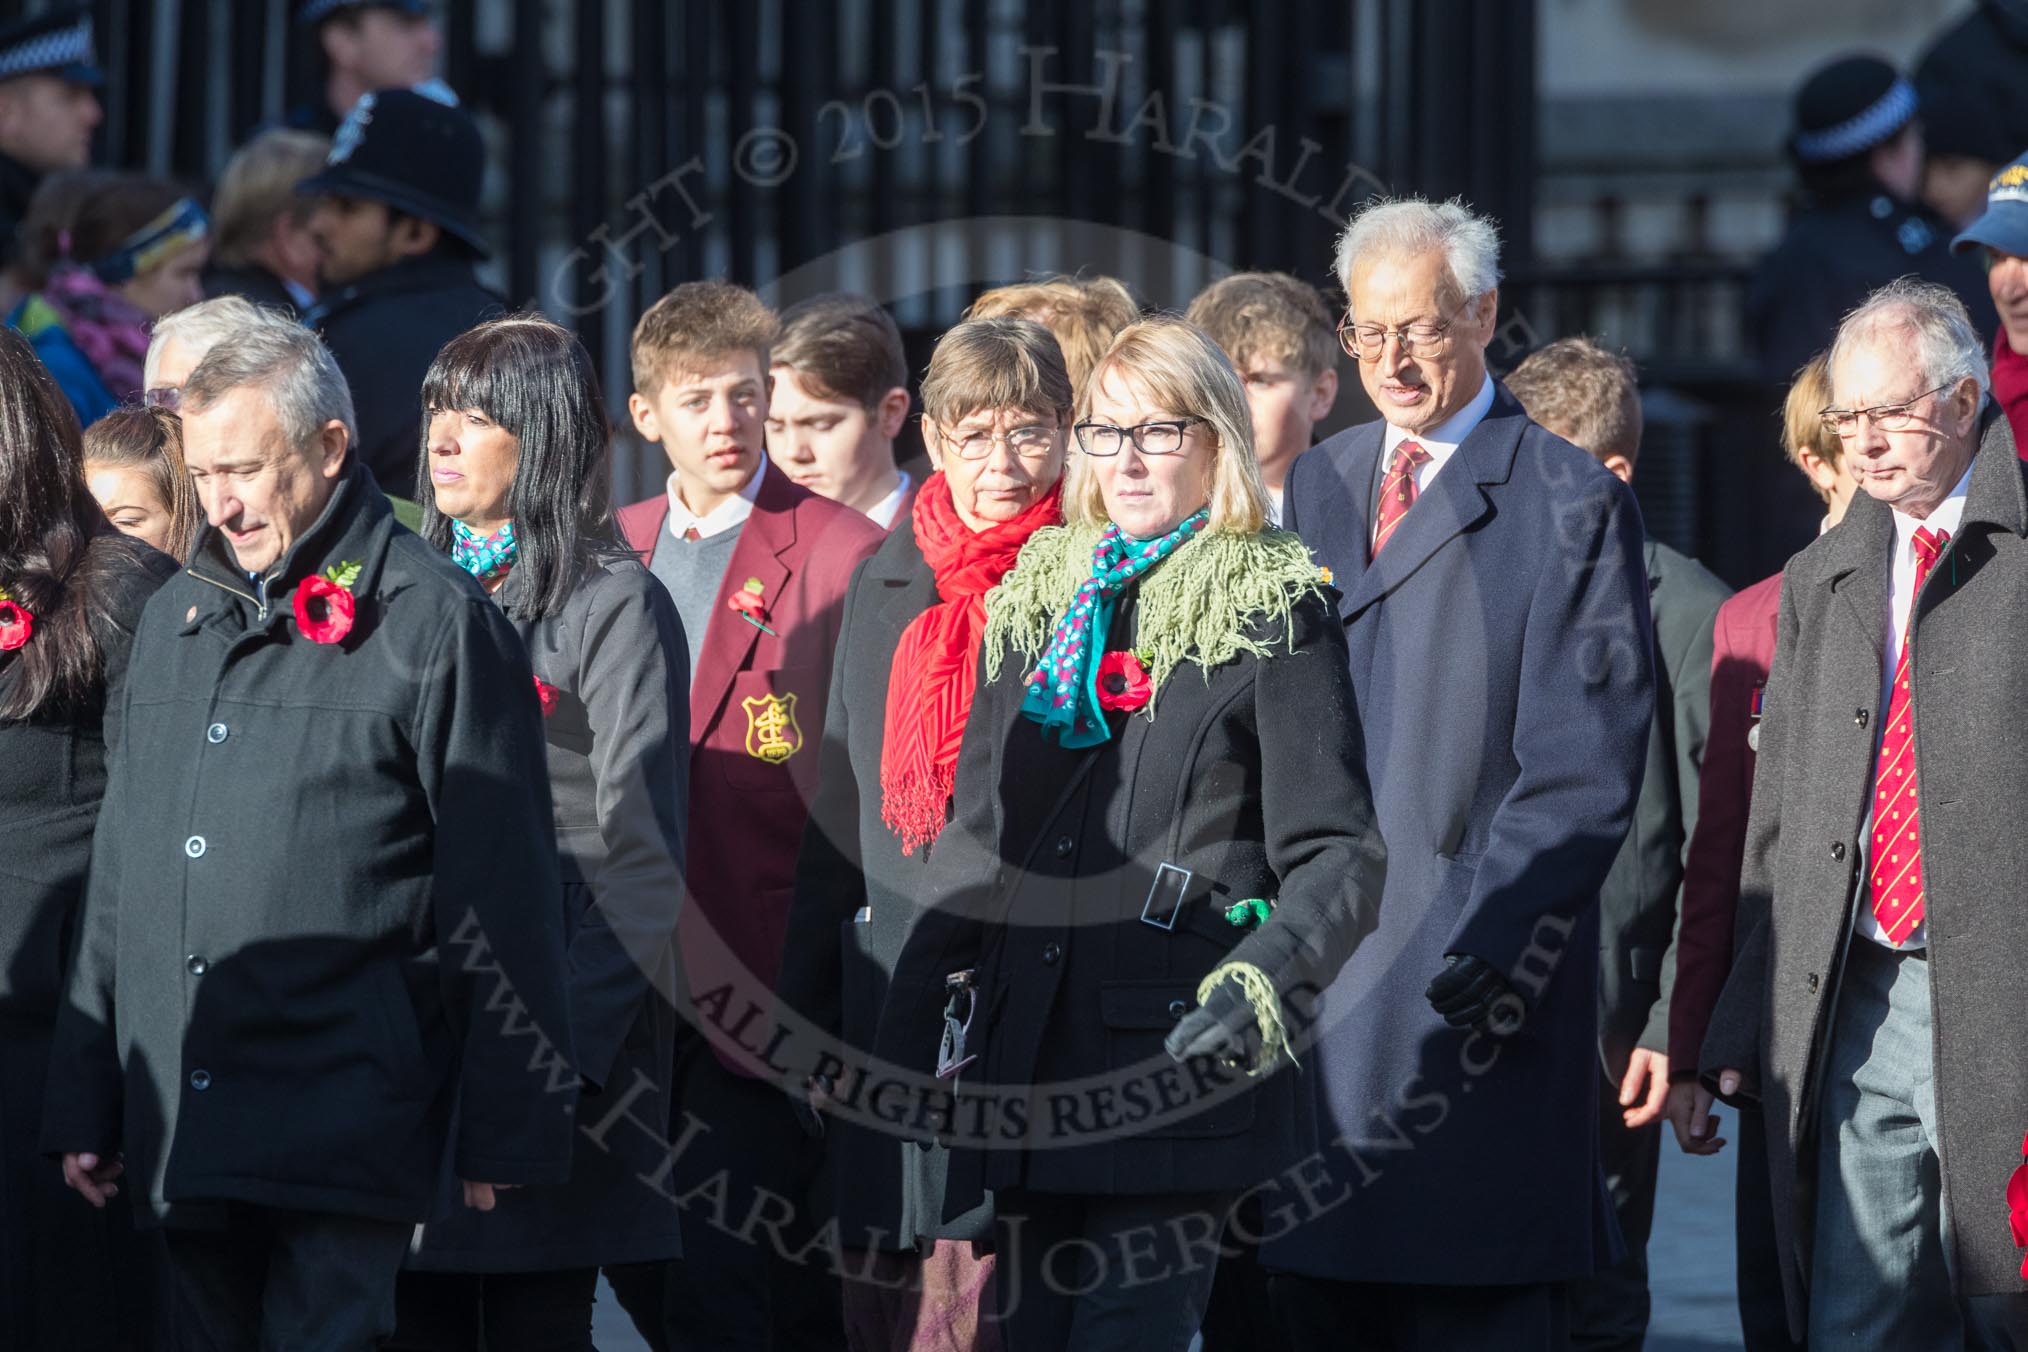 March Past, Remembrance Sunday at the Cenotaph 2016: M20 Old Cryptians' Club.
Cenotaph, Whitehall, London SW1,
London,
Greater London,
United Kingdom,
on 13 November 2016 at 13:16, image #2649